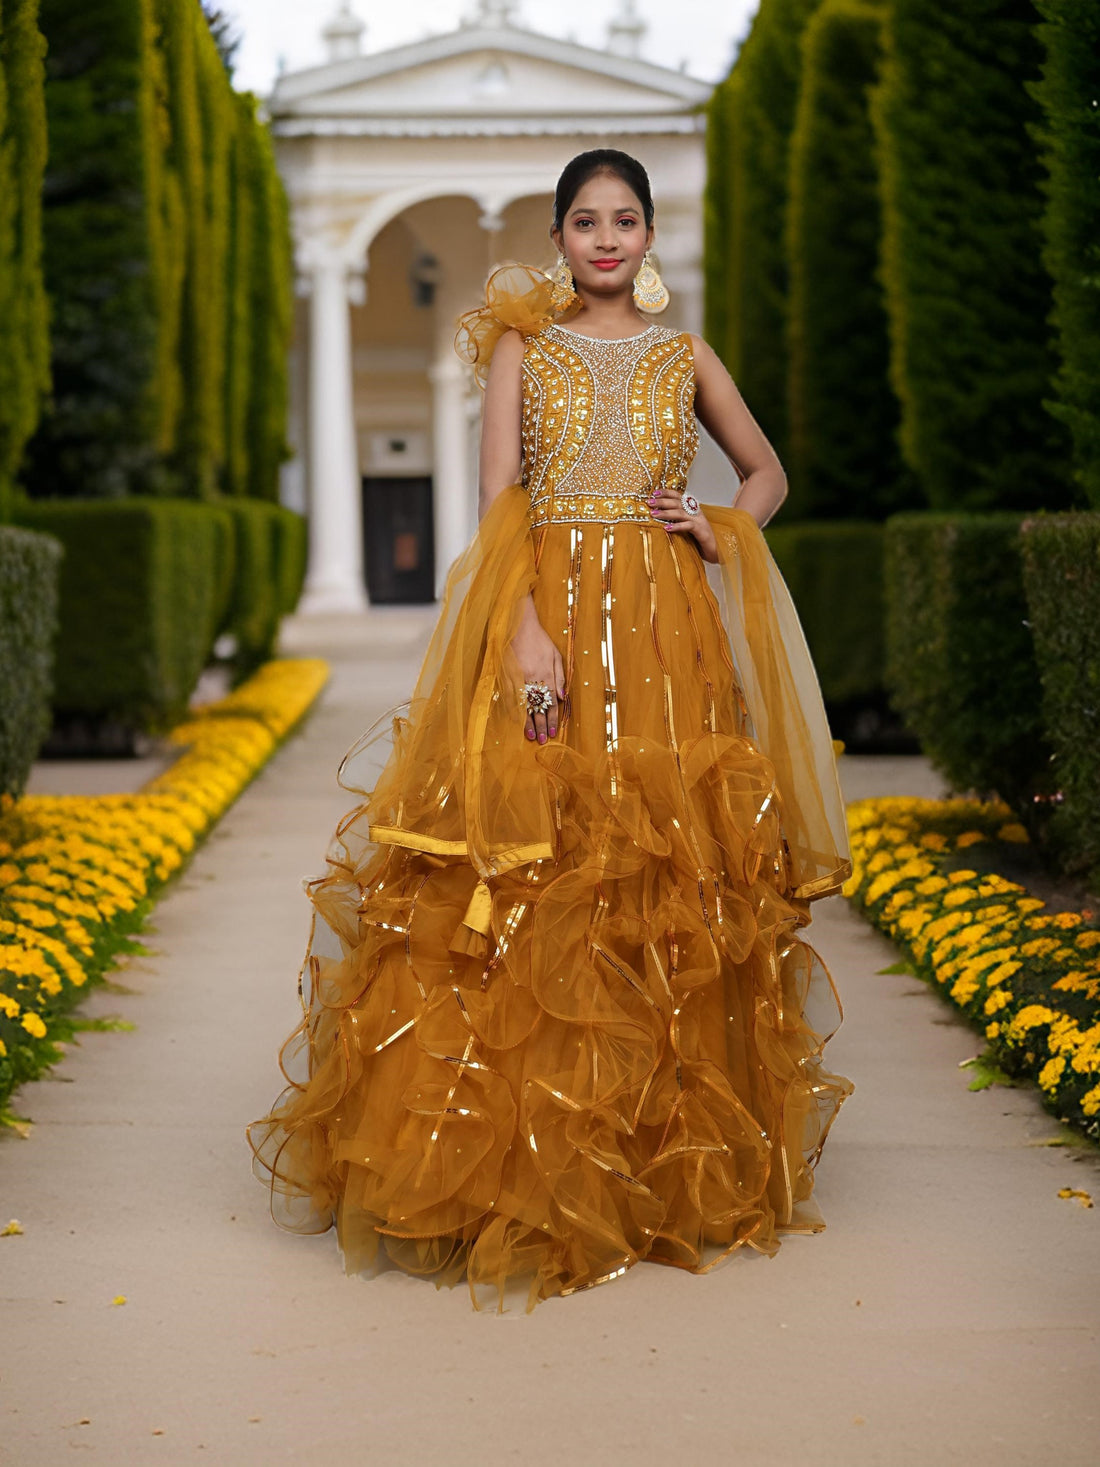 Gown with Cut Dana &amp; Sequin Work by Shreekama Mustard Yellow Designer Gowns for Party Festival Wedding Occasion in Noida